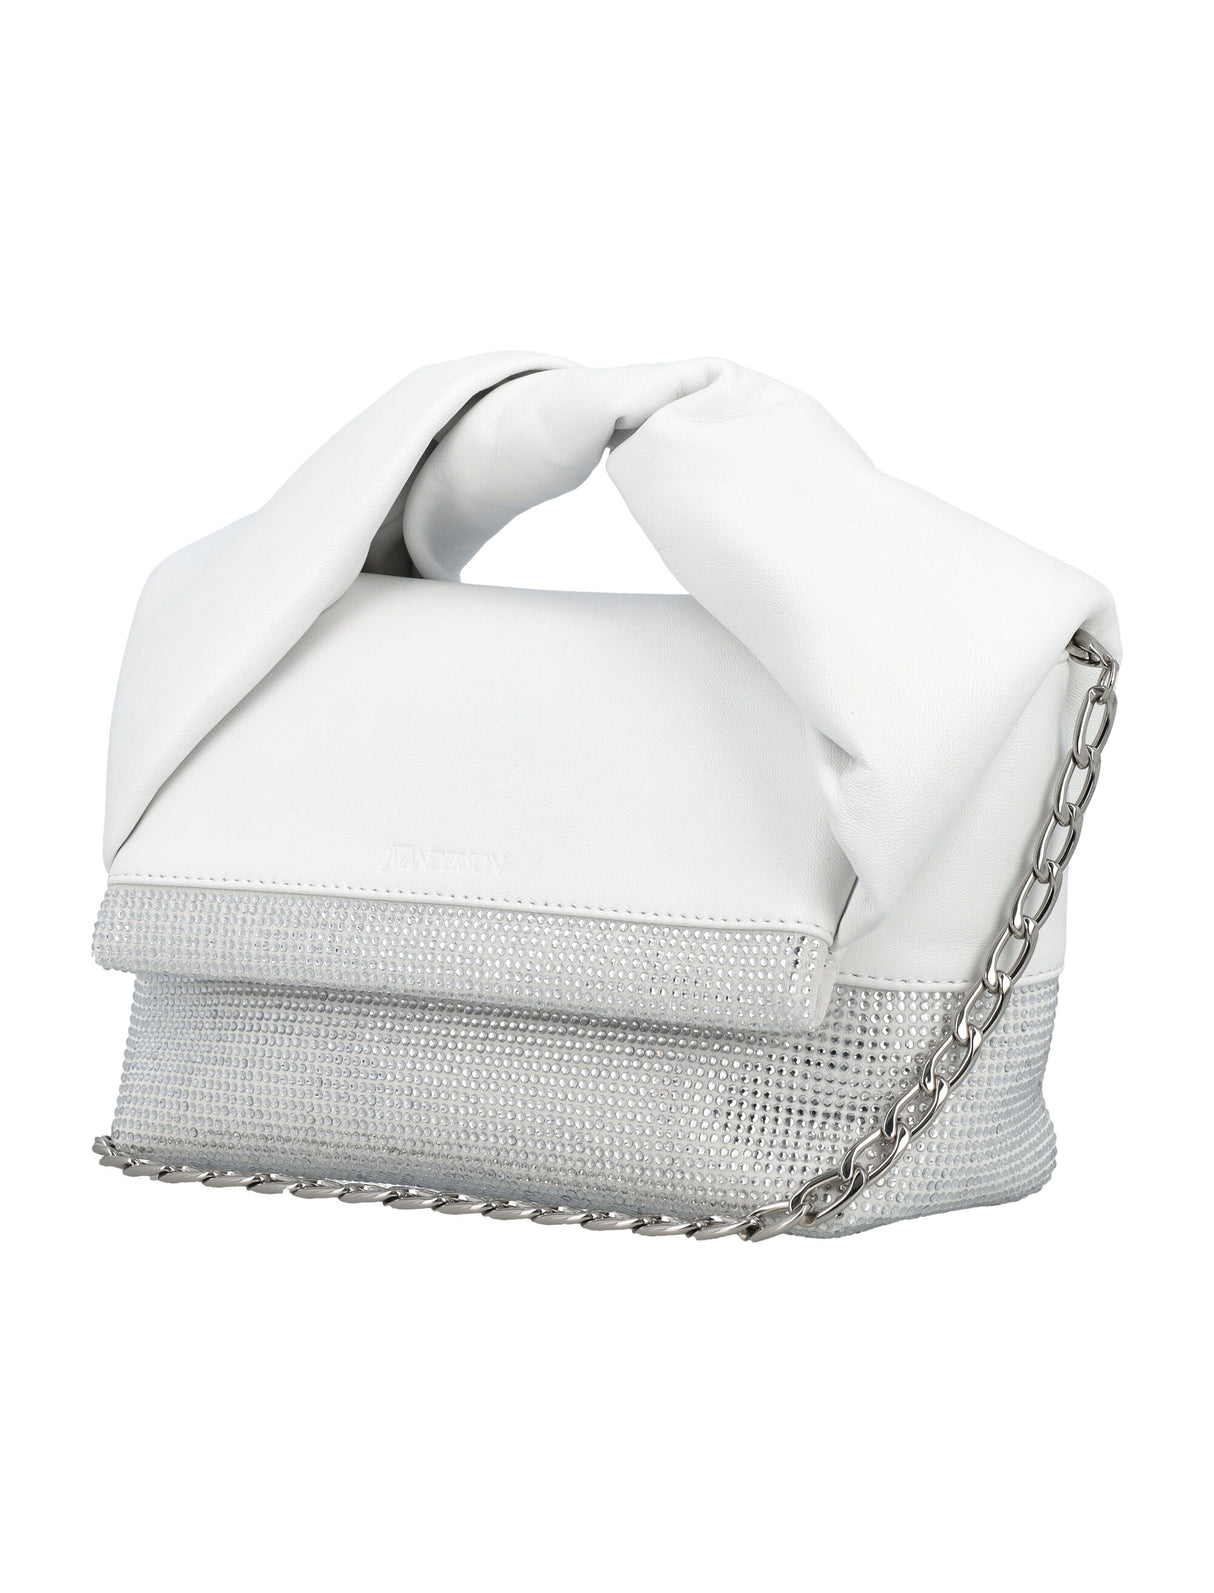 JW ANDERSON White Leather Medium Twister Handbag with Crystal Accents and Silver Chain Strap